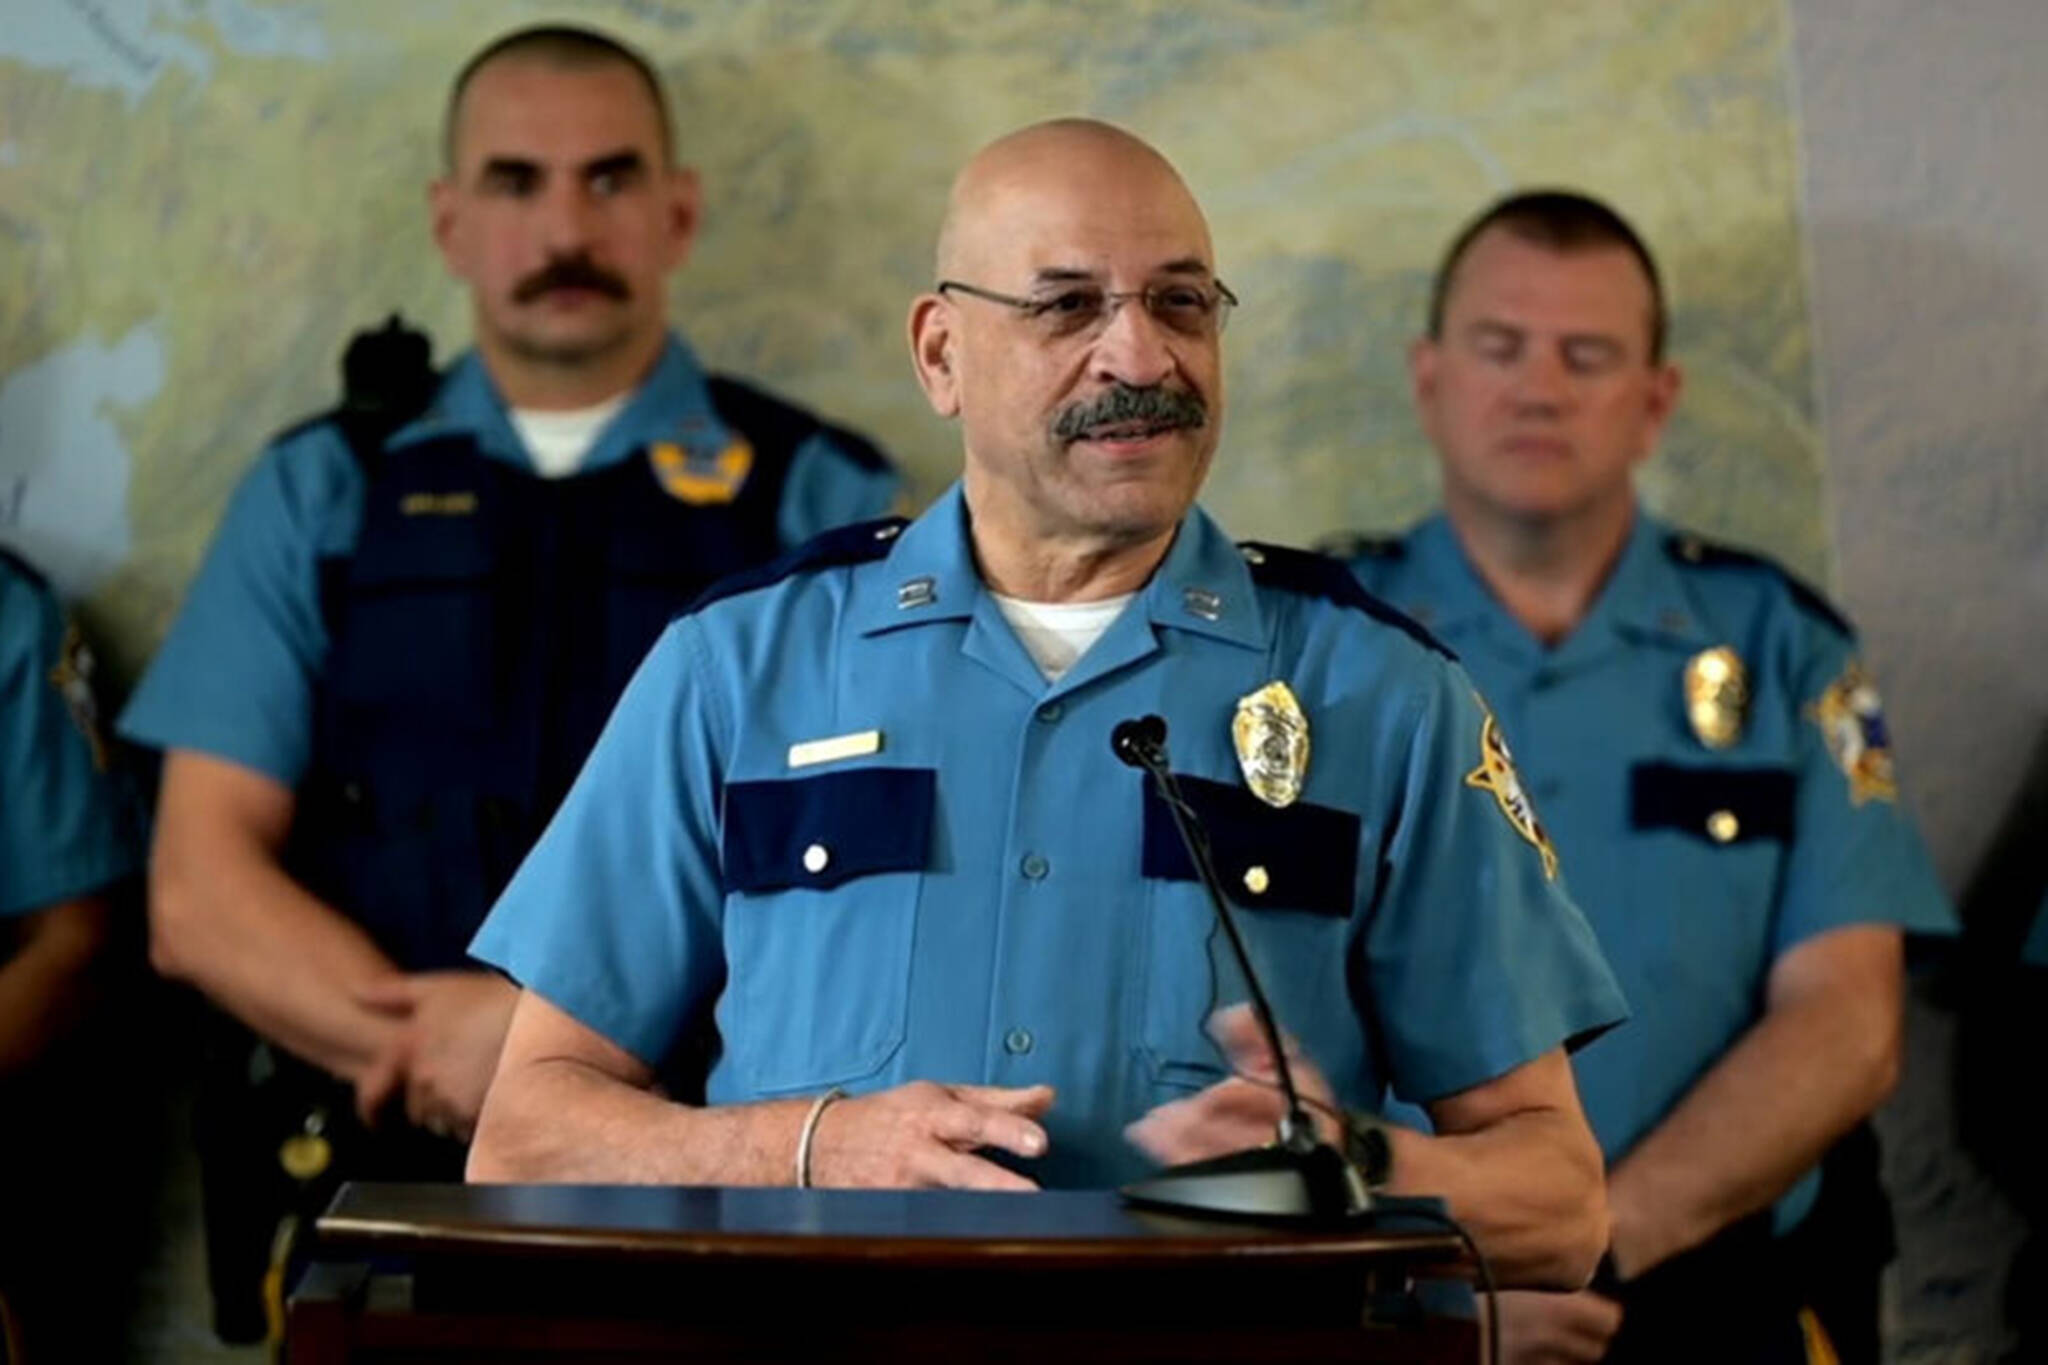 Alaska State Troopers Capt. Maurice "Mo" Hughes is seen at a news conference on Wednesday, Aug. 31, 2022 during a ceremony naming him the first Black leader of the Alaska State Troopers. (Video screenshot)